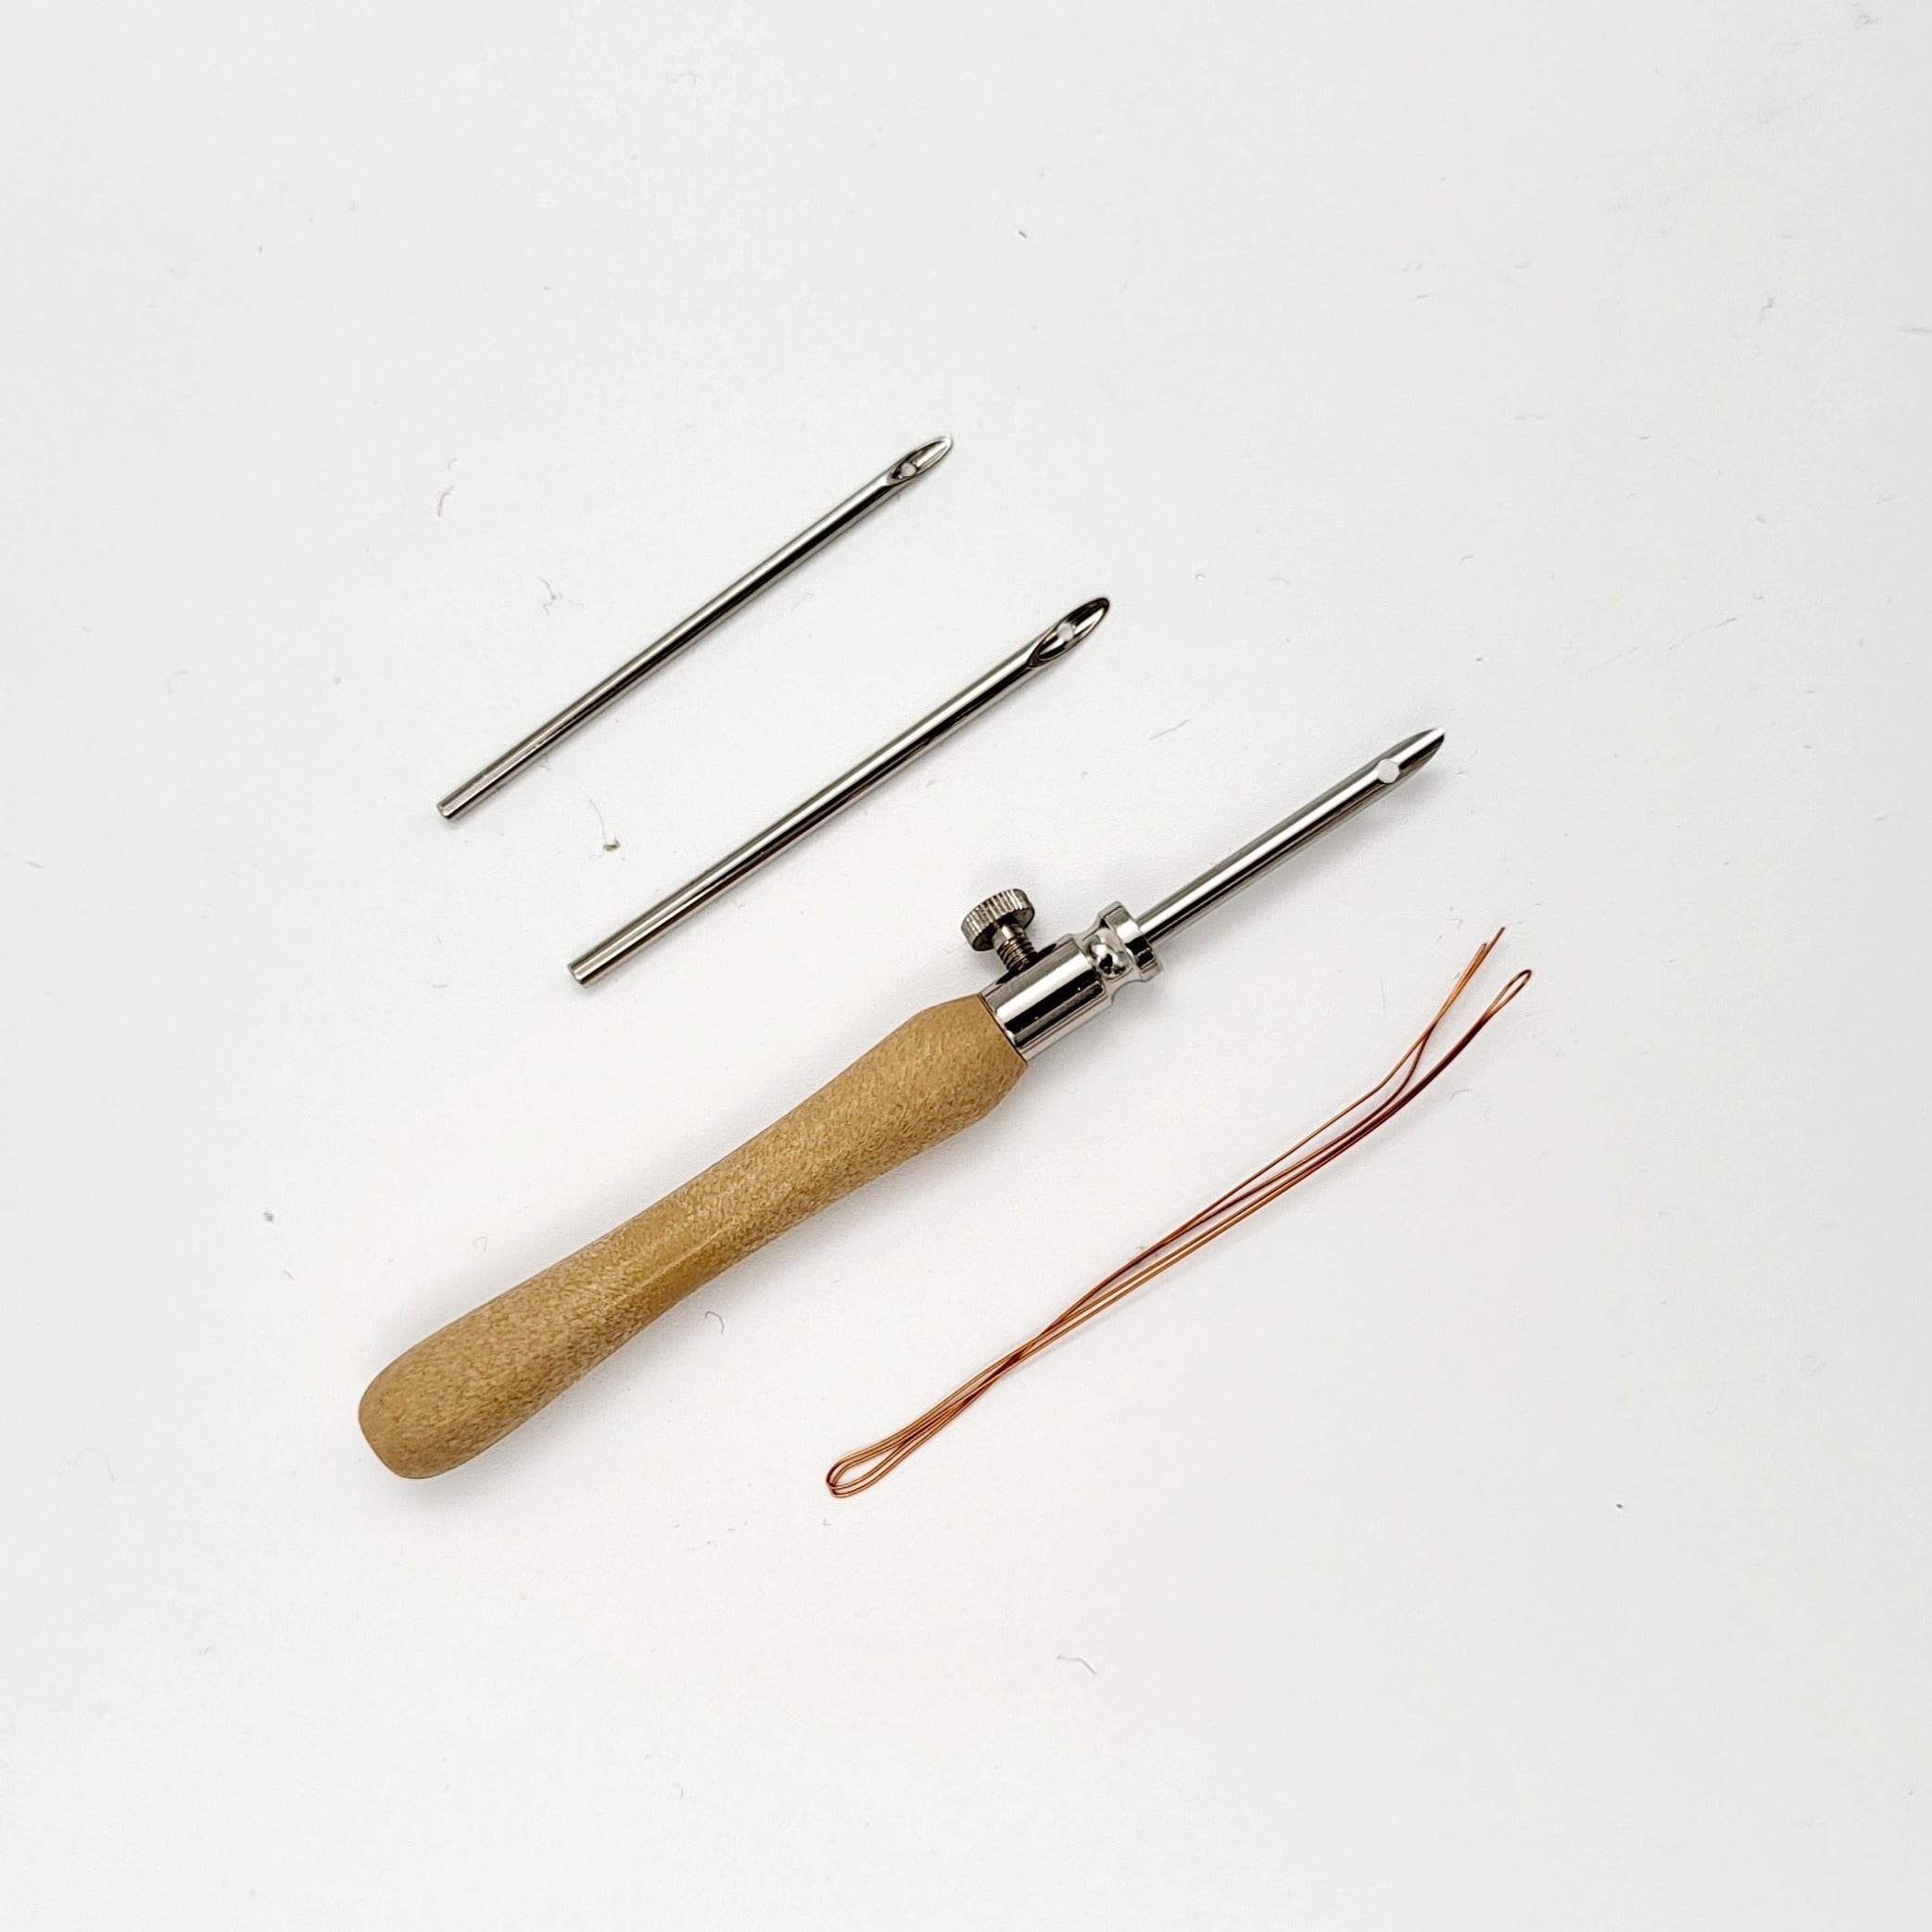 Lavor punch needles (bundle of two) – Whole Punching